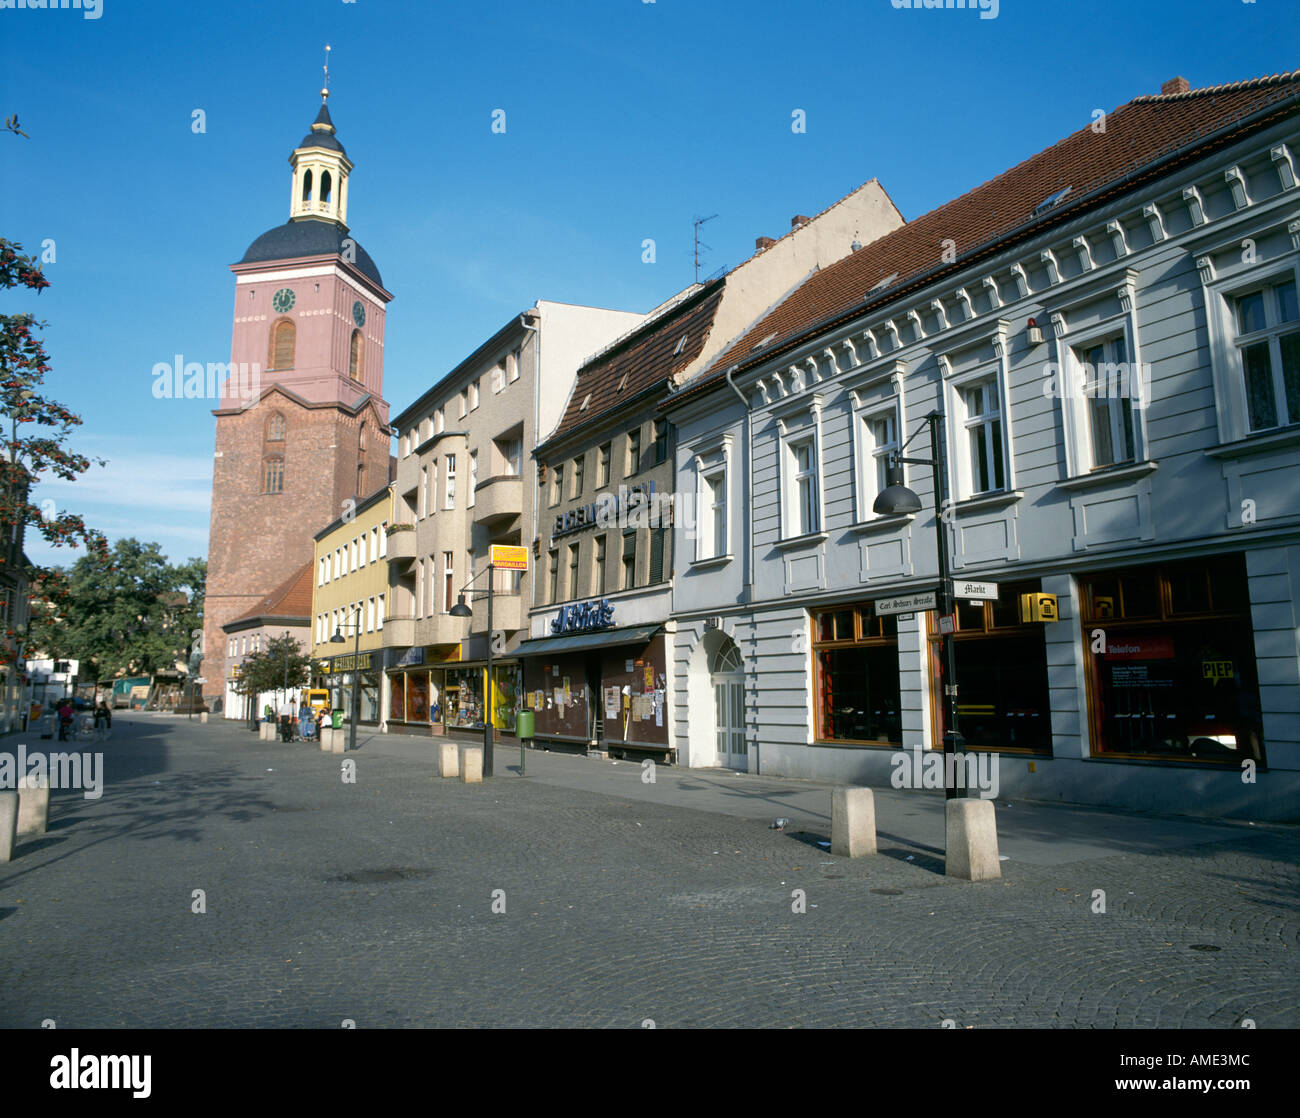 A part of the old town of Spandau the tower of the Baroque neo Gothic St Nikolai Church in the distance Stock Photo